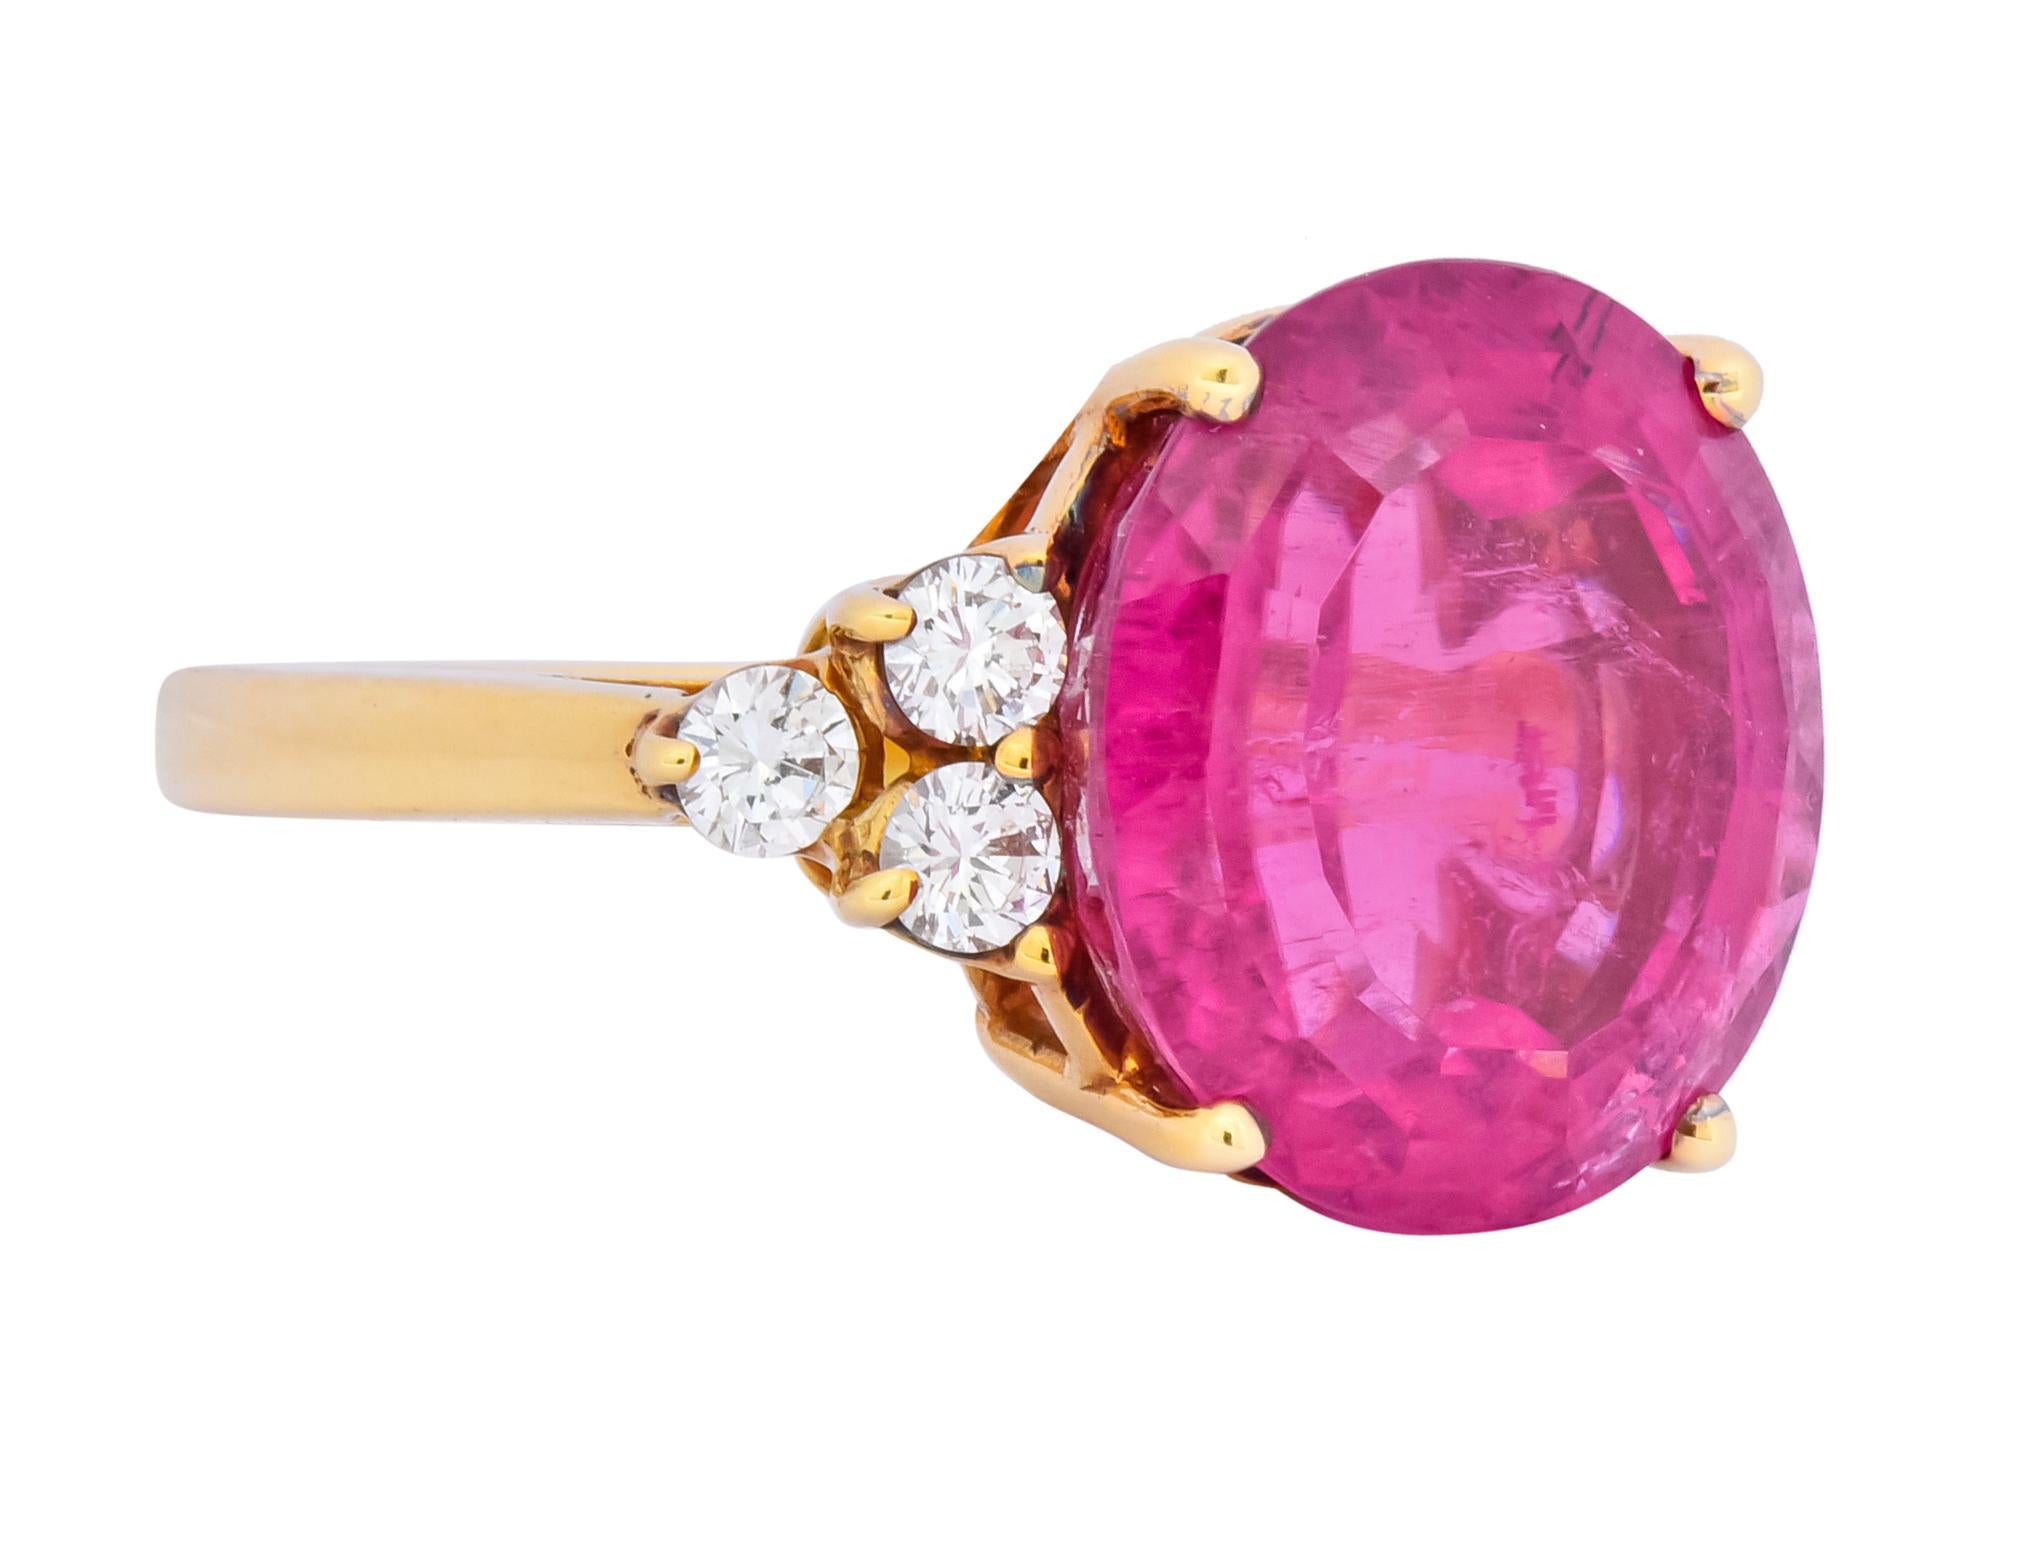 Centering a basket set set oval mixed cut tourmaline weighing approximately 10.73 carat, transparent and a saturated hot pink color

Flanked by round brilliant cut diamonds, prong set in triangular formations, weighing approximately 0.36 carat, G/H